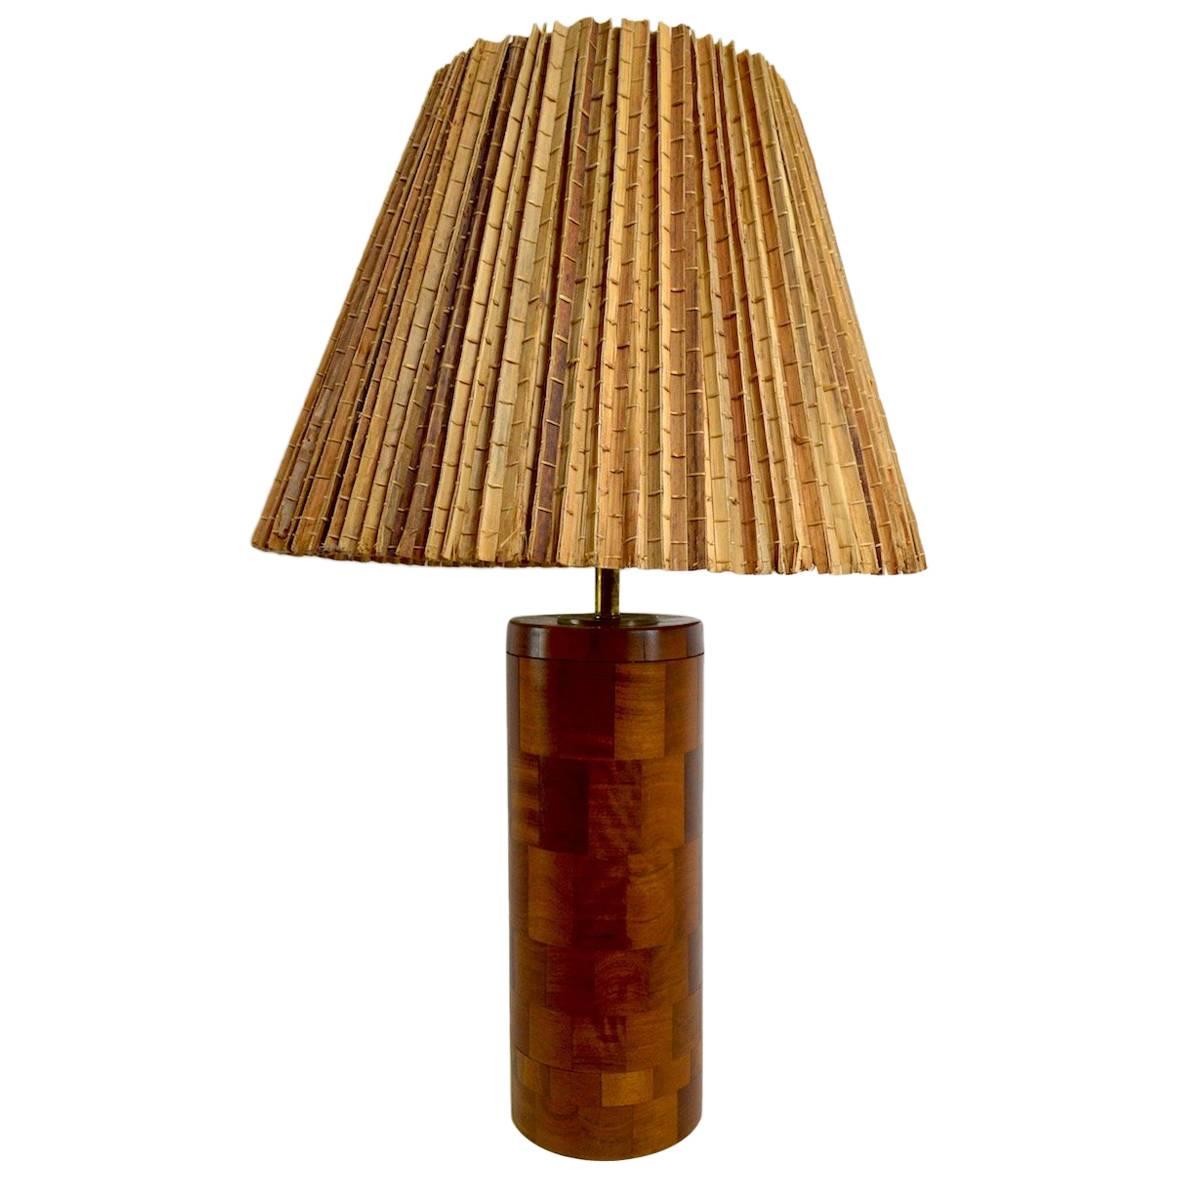 Stacked Wood Block Table Lamp after Phil Powell